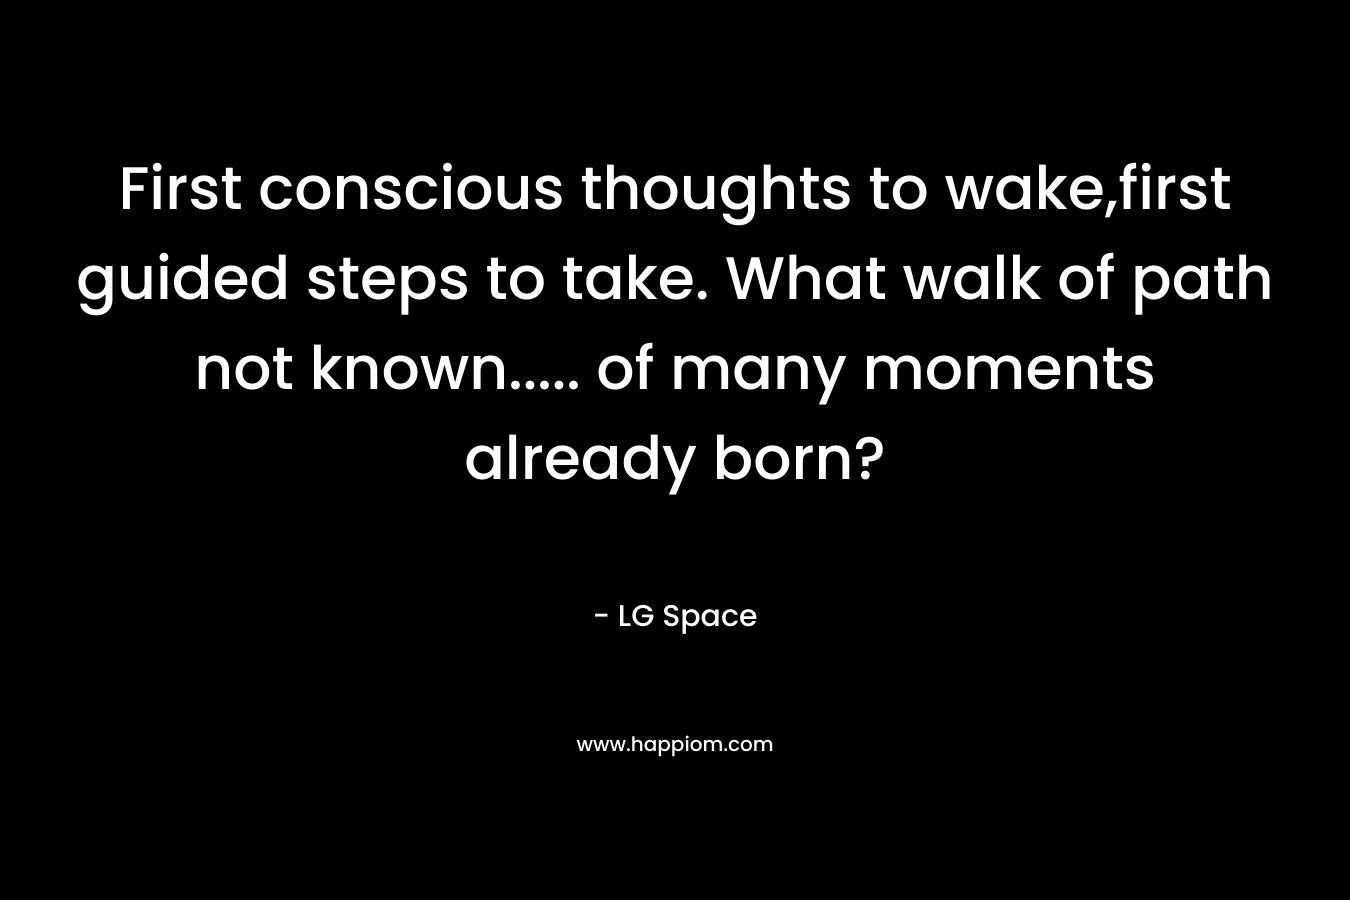 First conscious thoughts to wake,first guided steps to take. What walk of path not known..... of many moments already born?